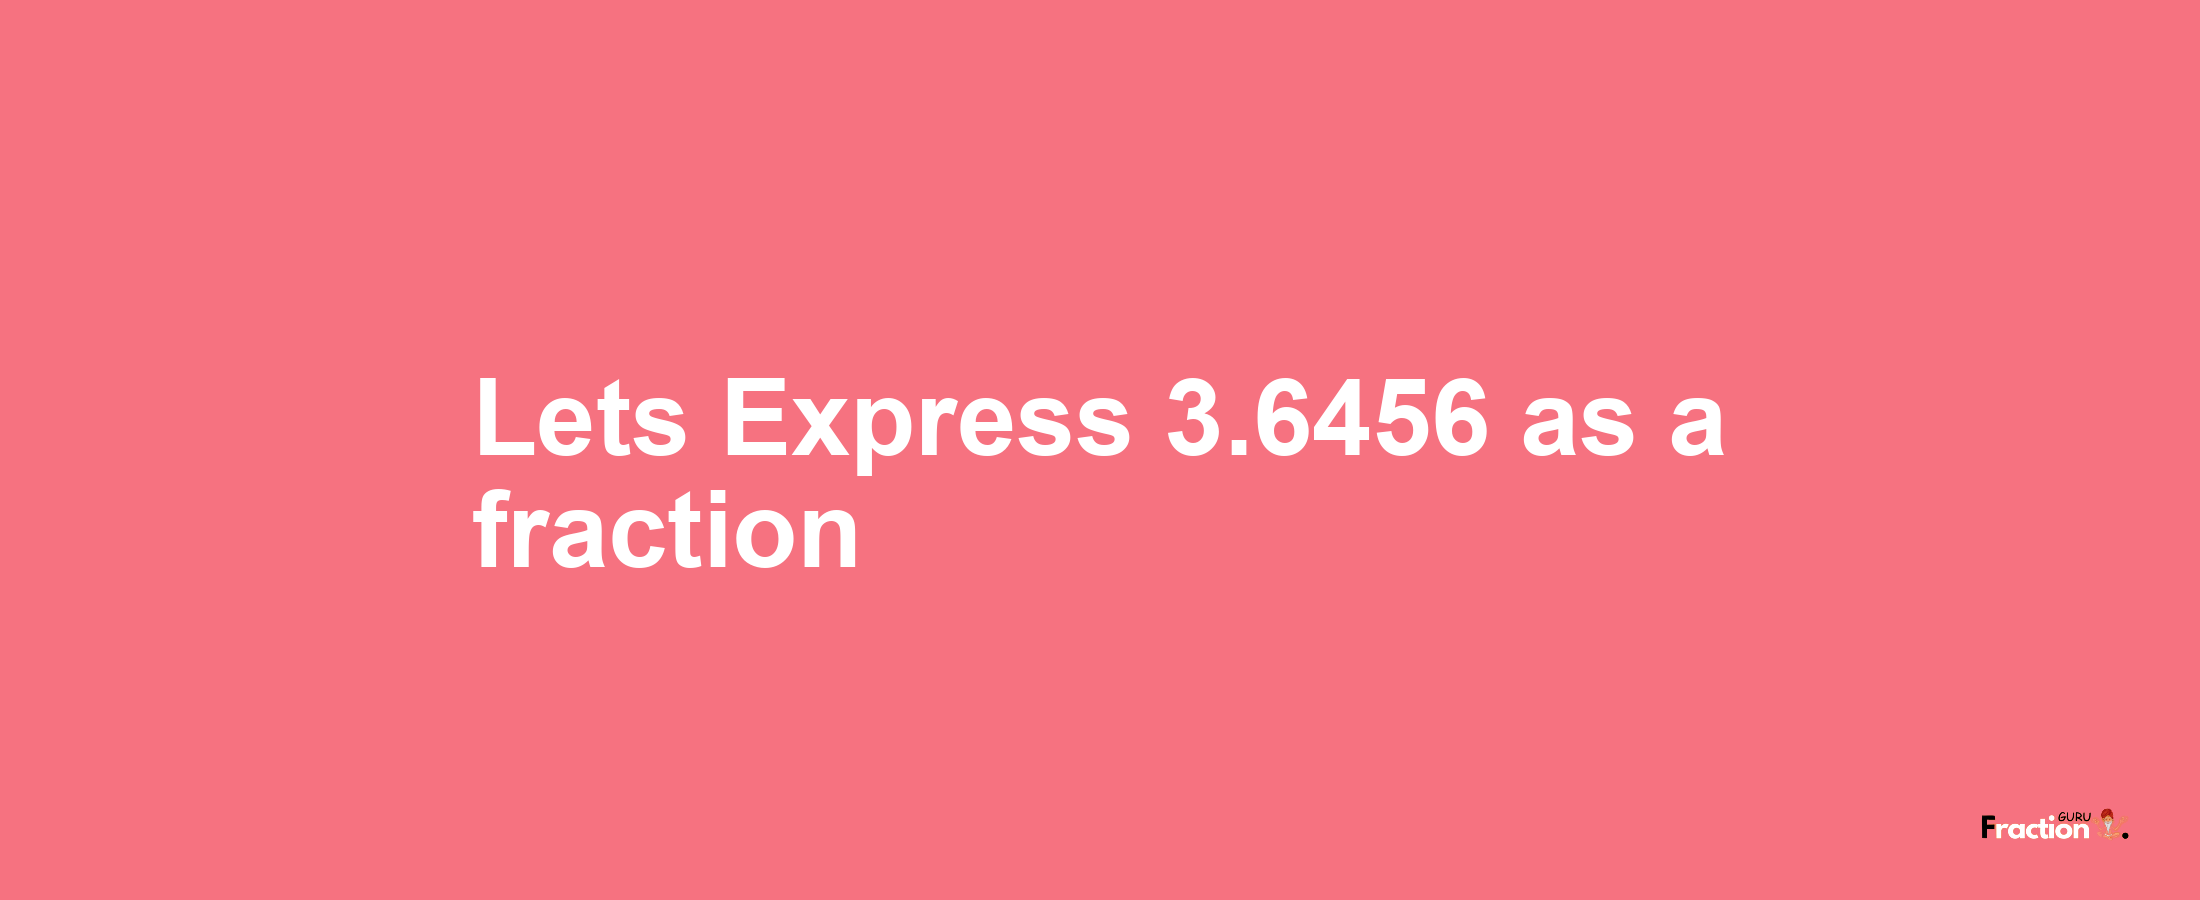 Lets Express 3.6456 as afraction